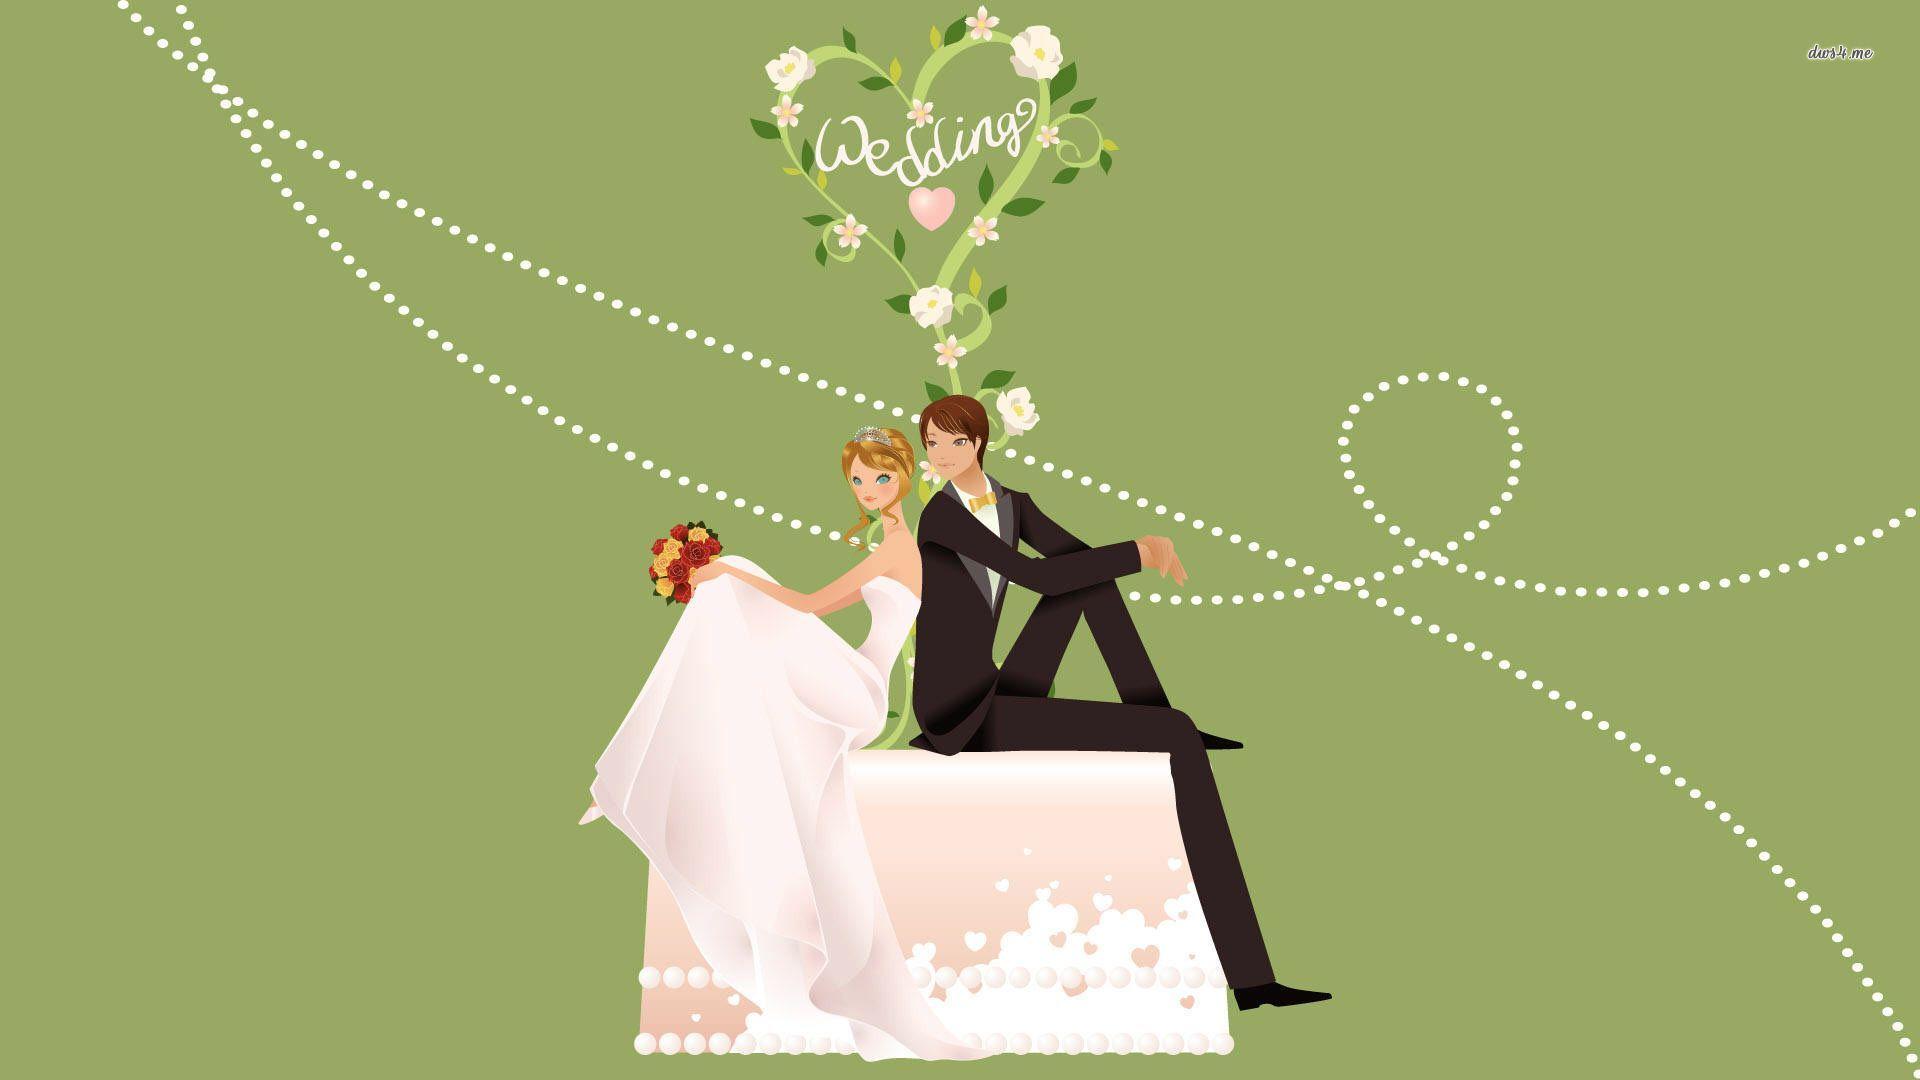 just married couple HD Wallpaper .com